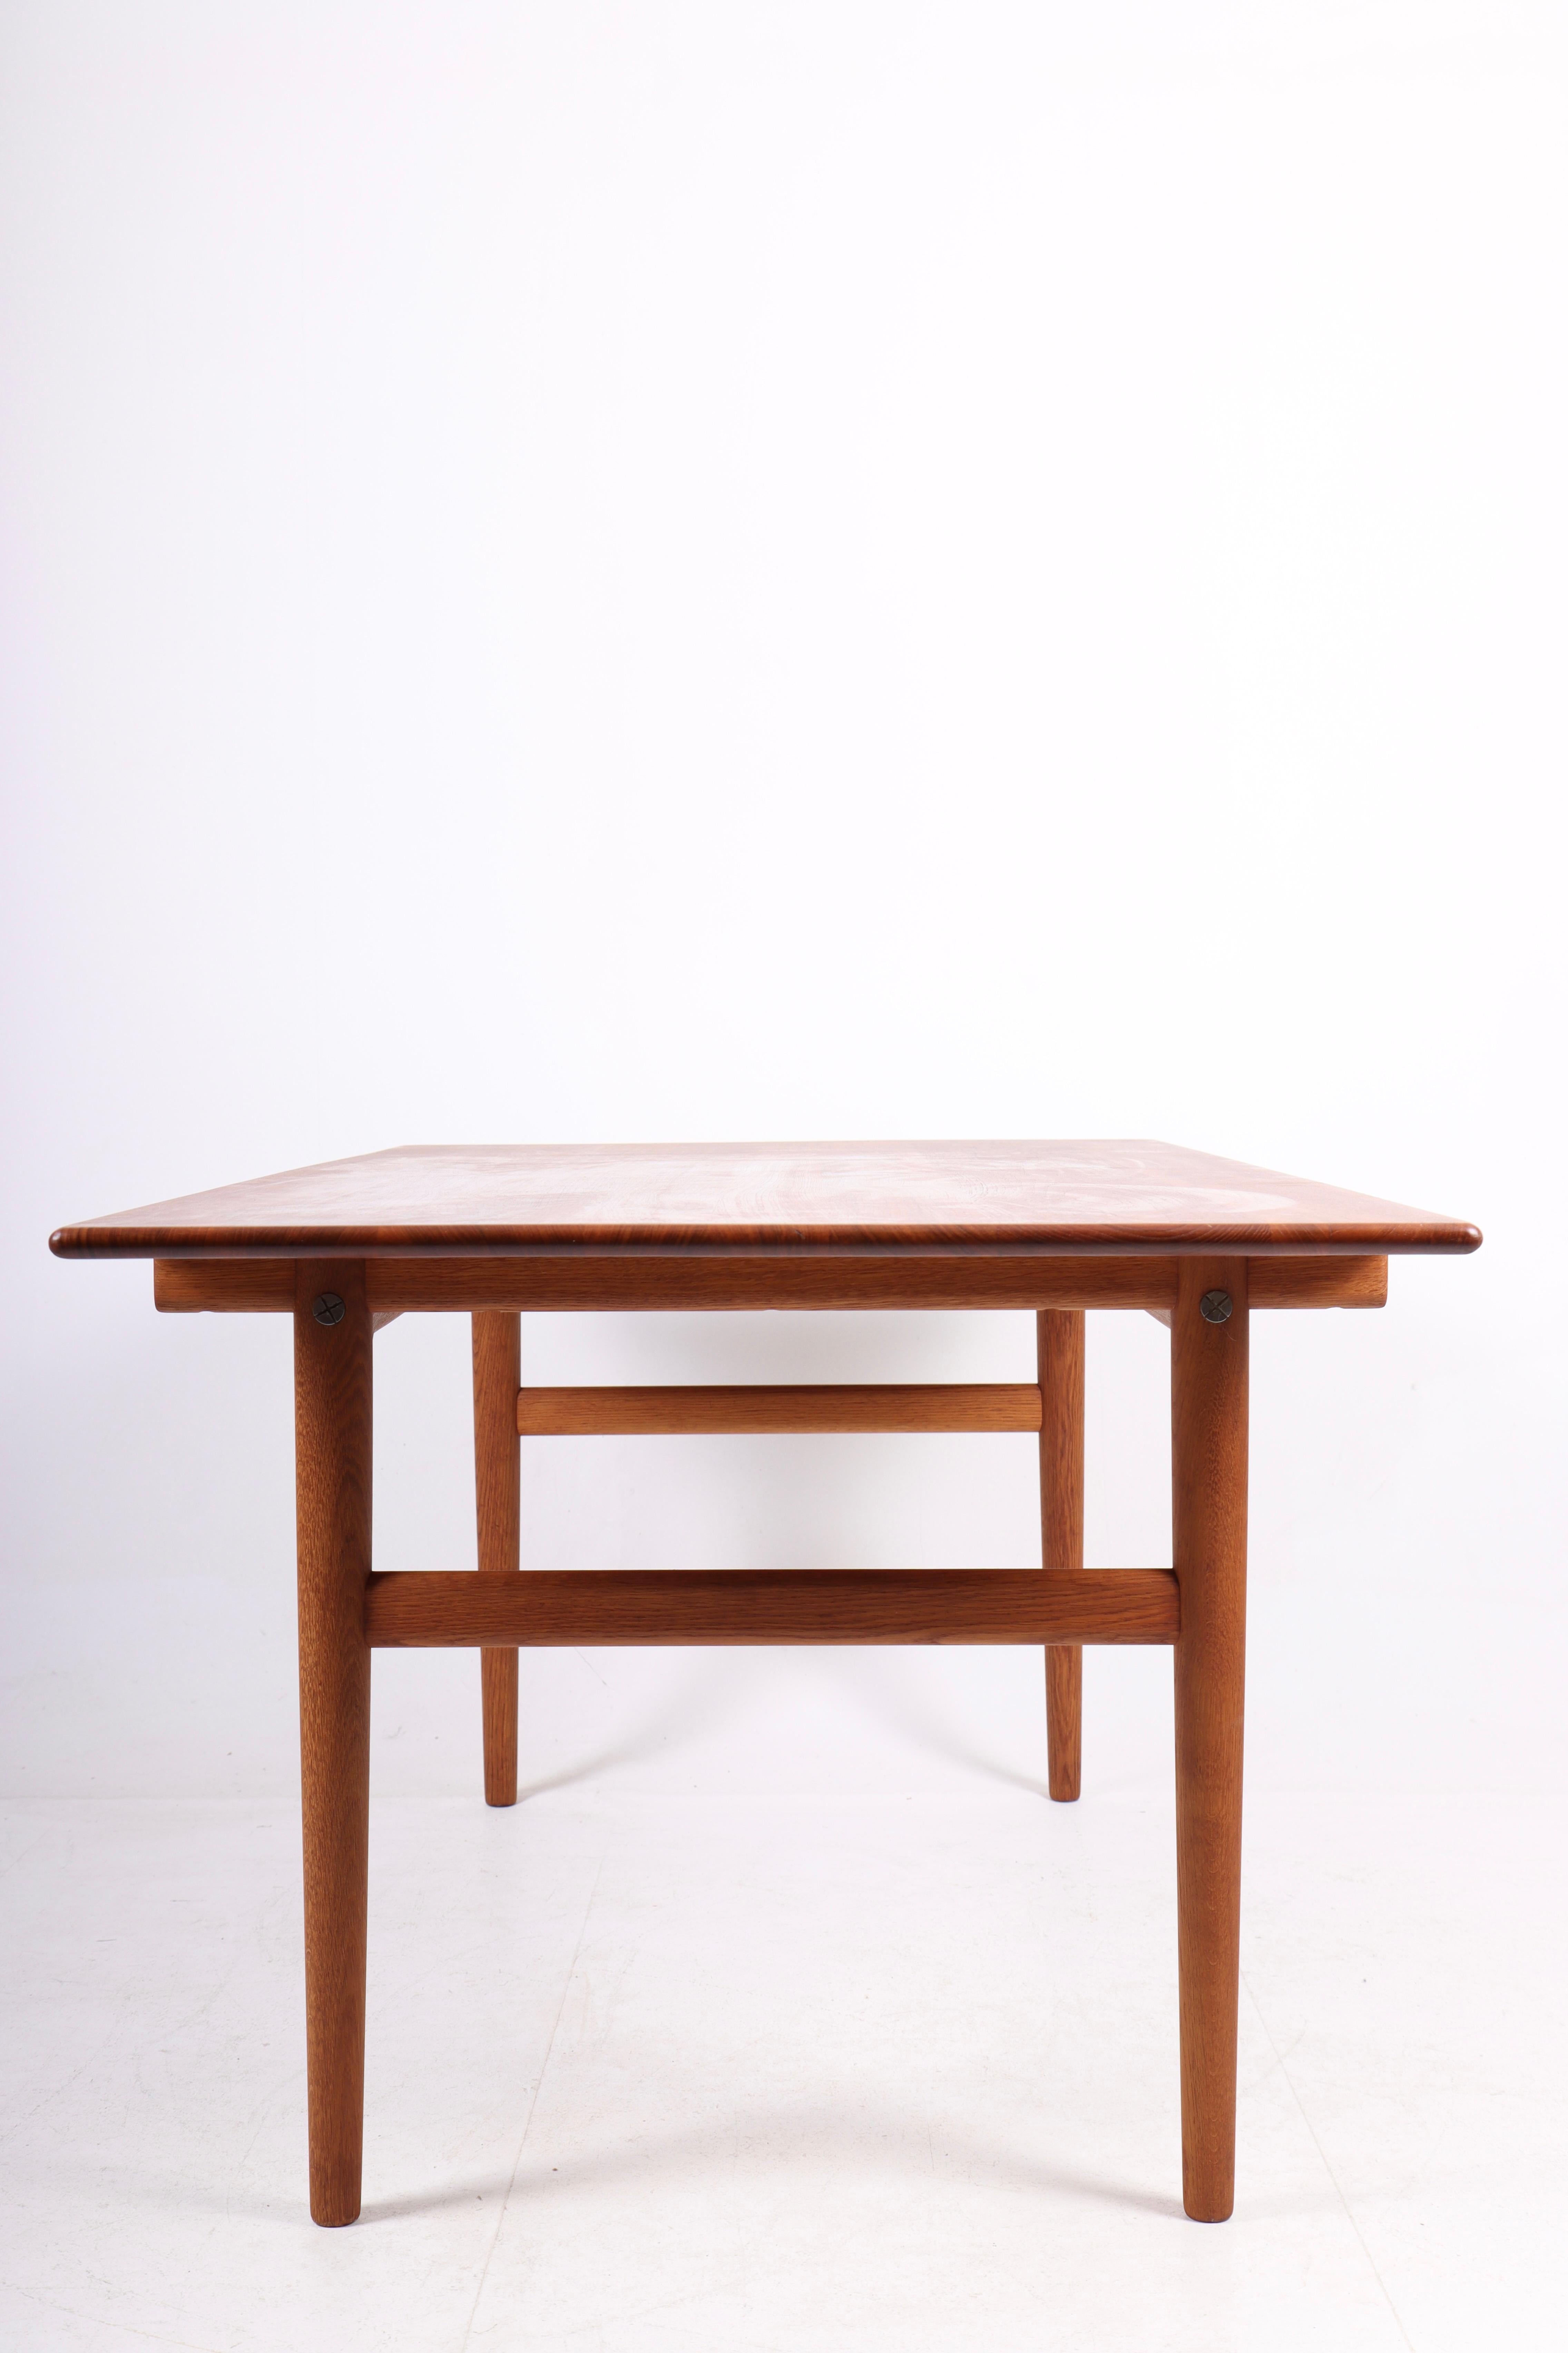 Work Table by Hans J. Wegner in Solid Teak In Excellent Condition For Sale In Lejre, DK